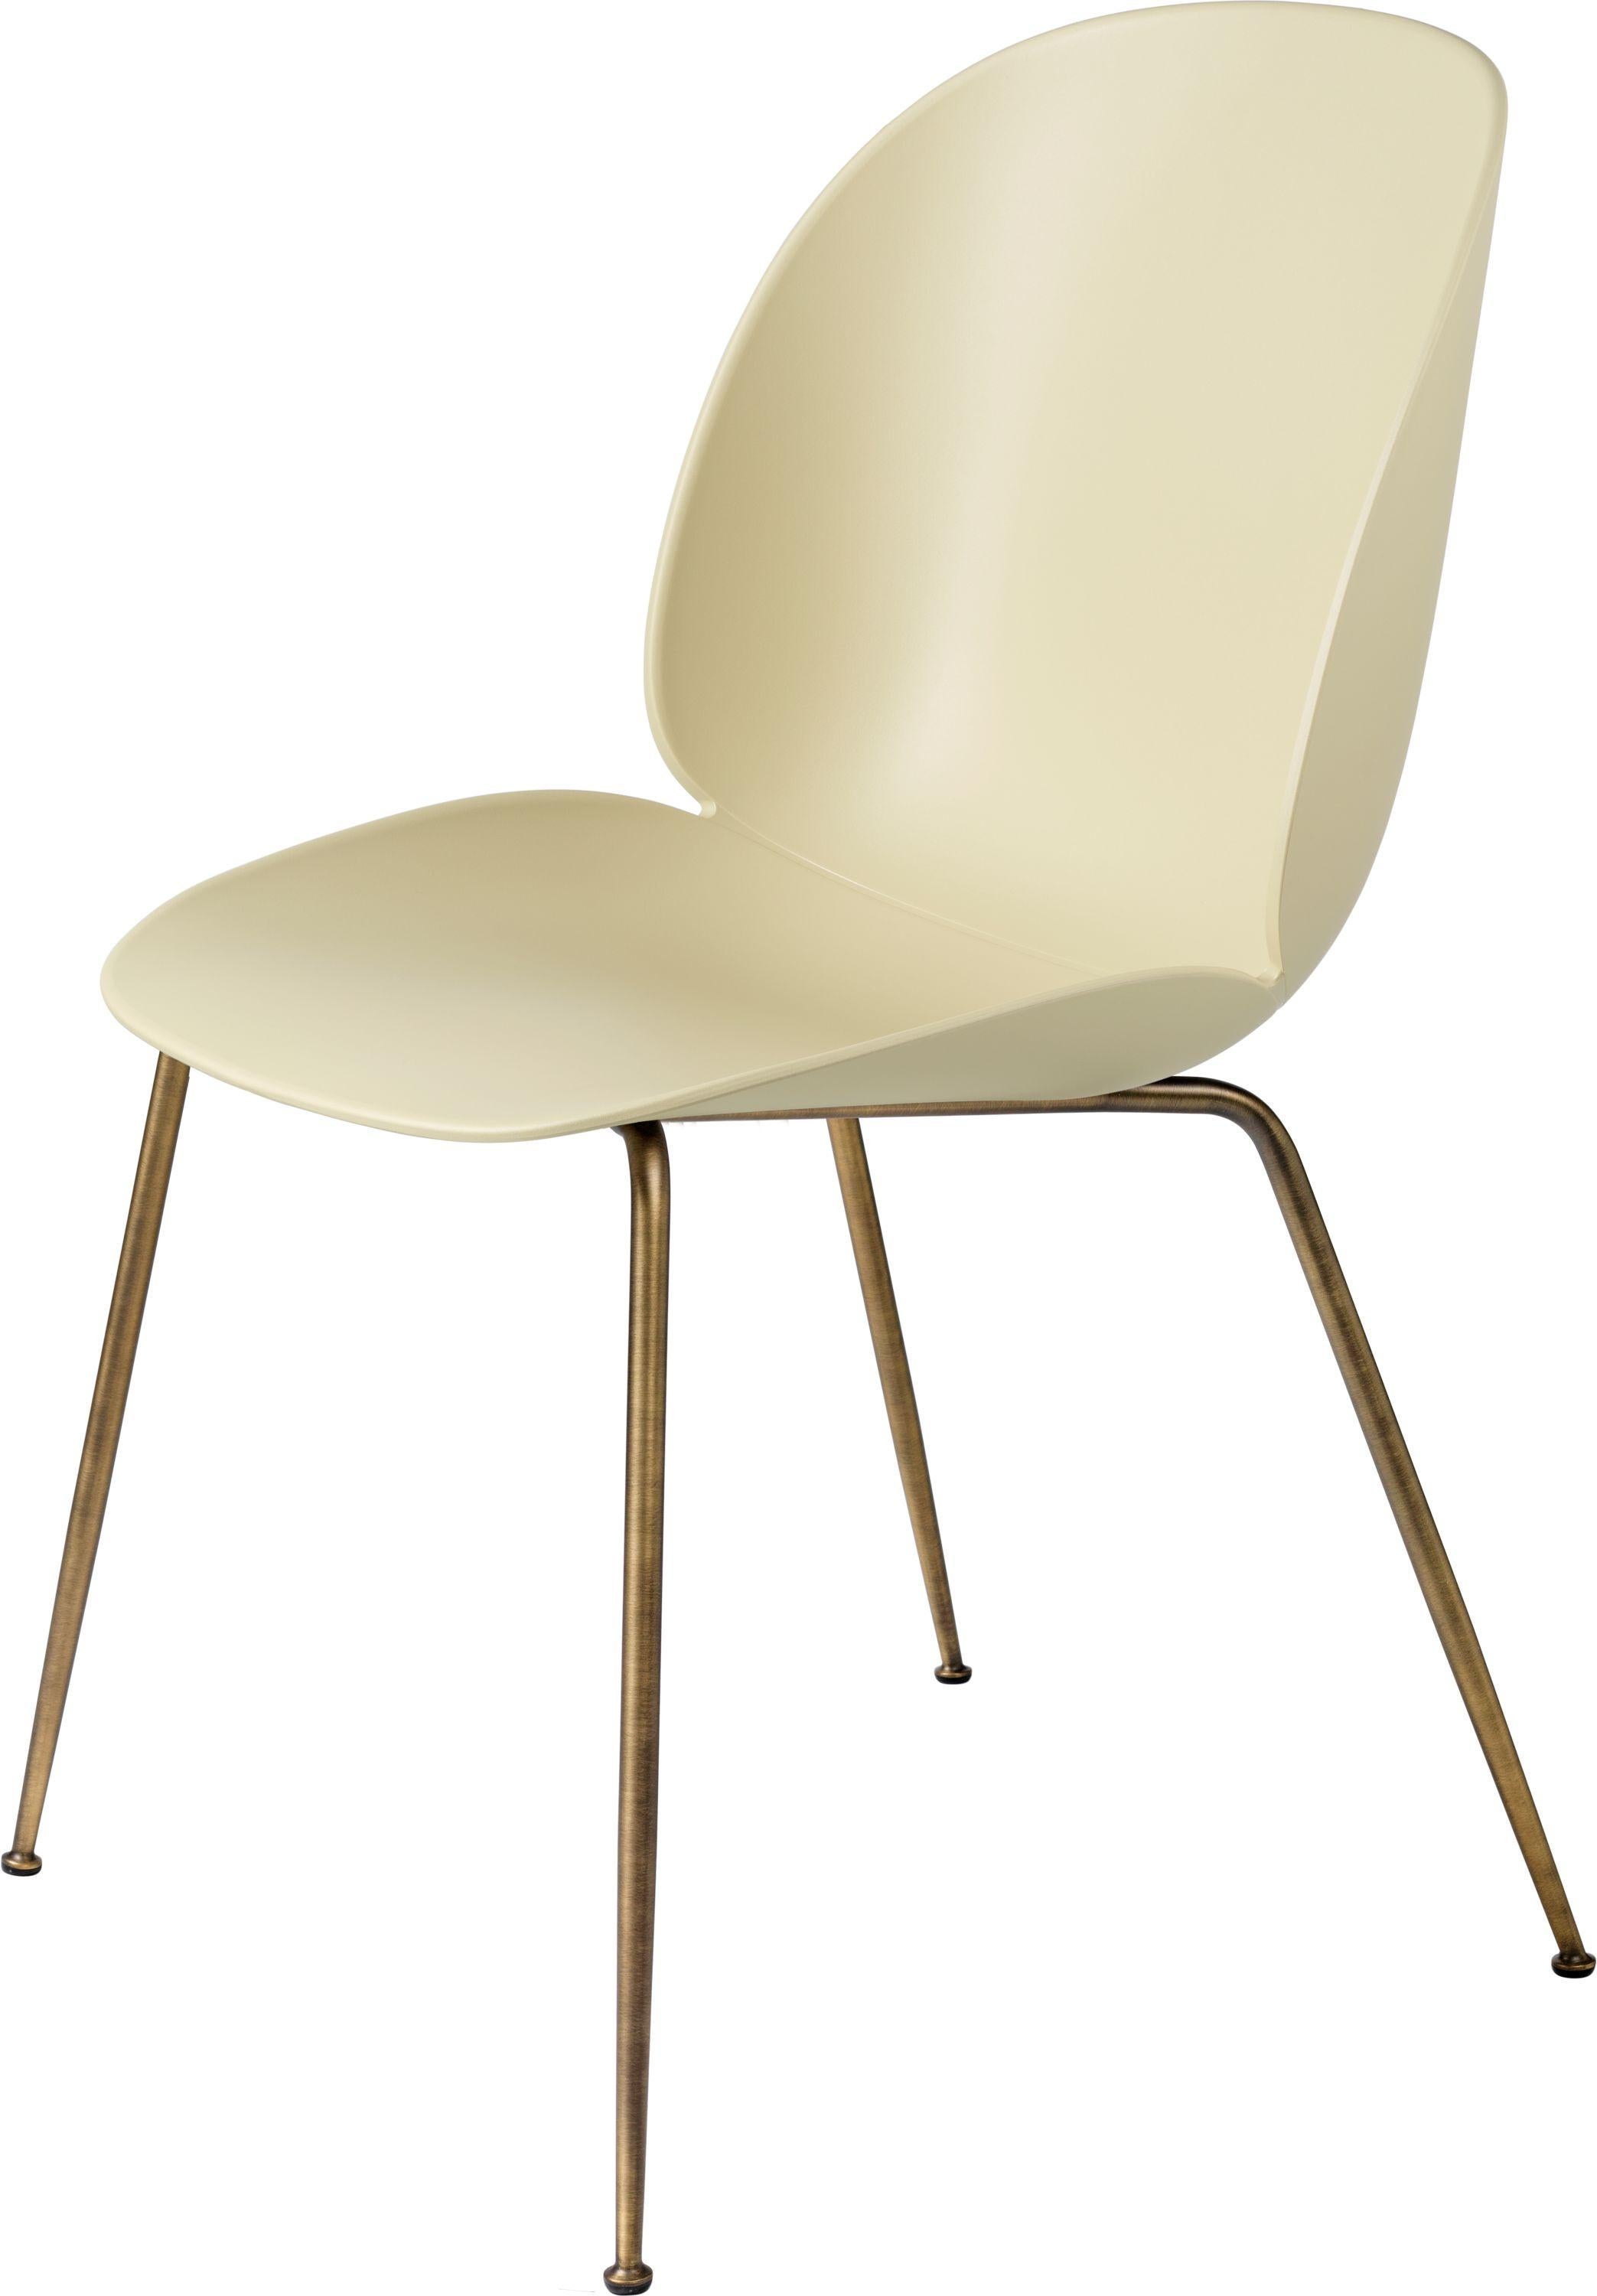 GamFratesi 'Beetle' Dining Chair with Antique Brass Conic Base 1